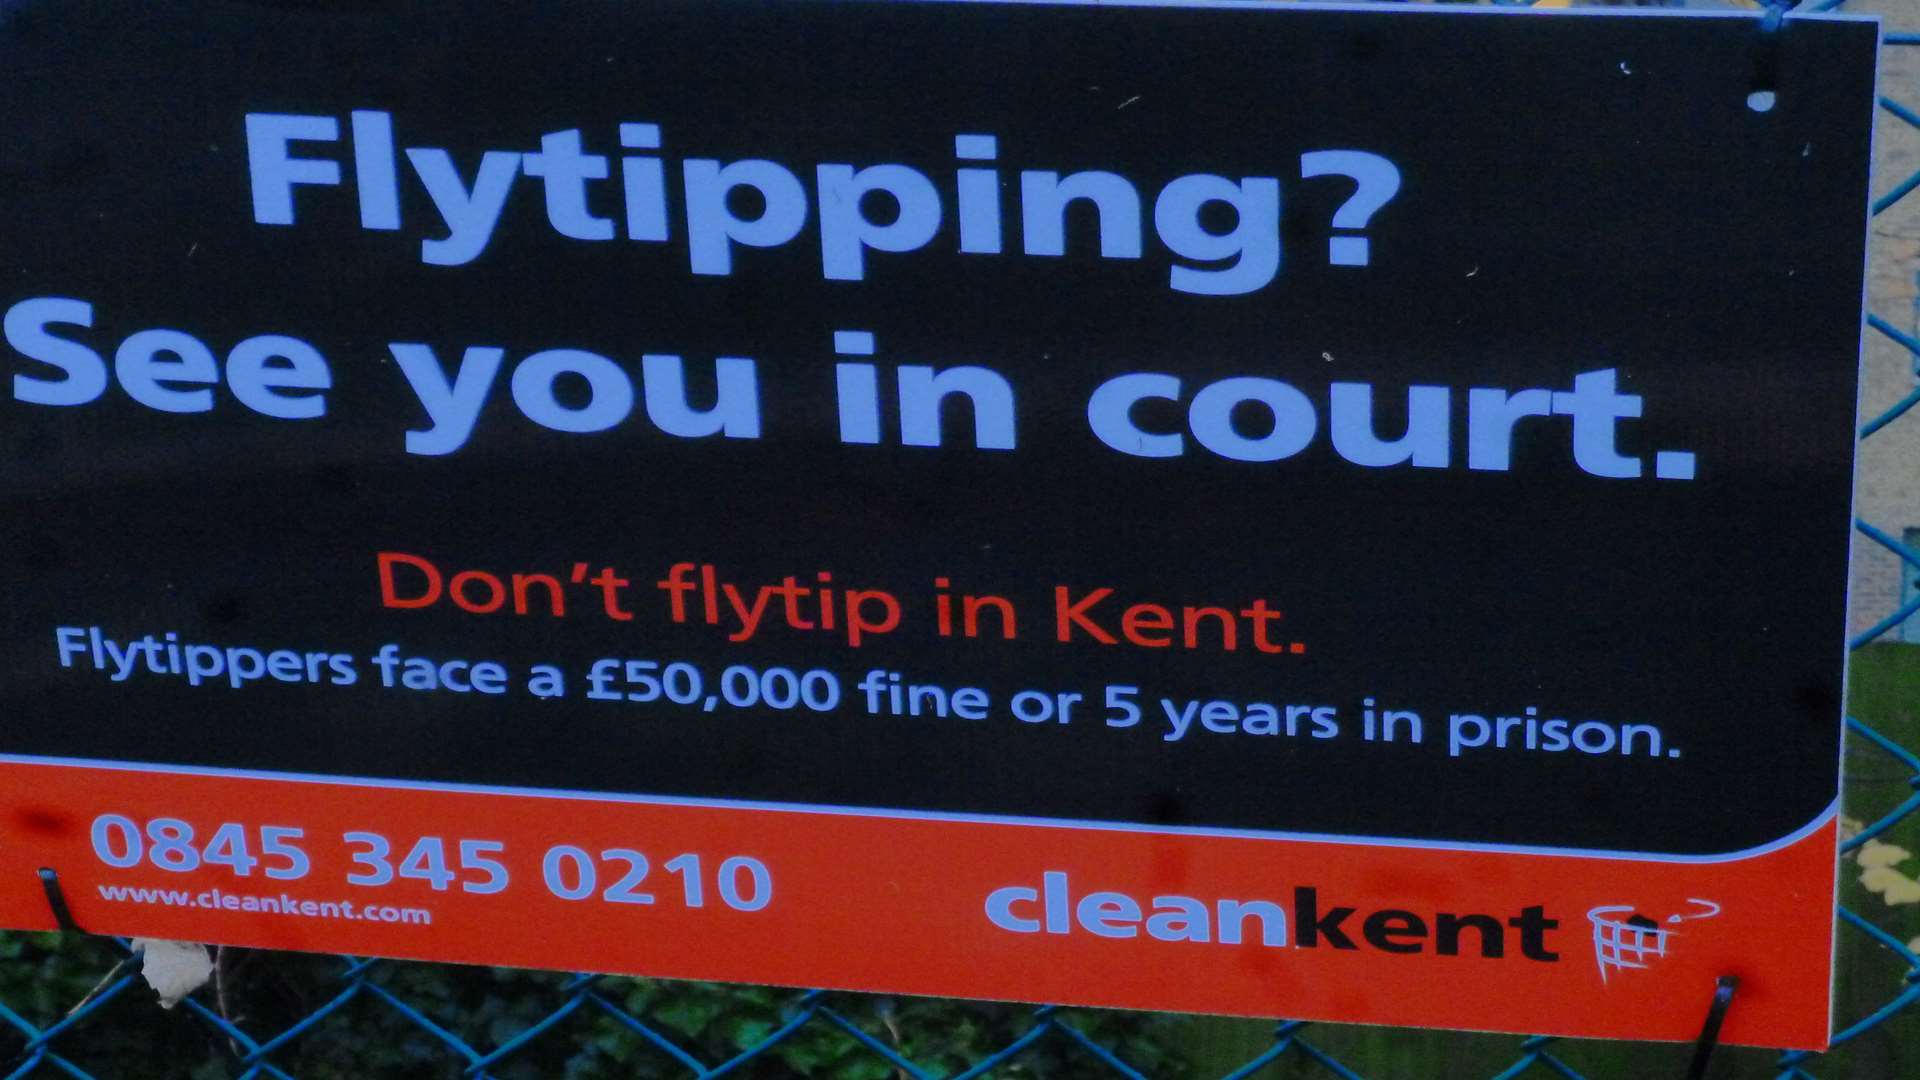 Kent County Council has warned people not to fly-tip